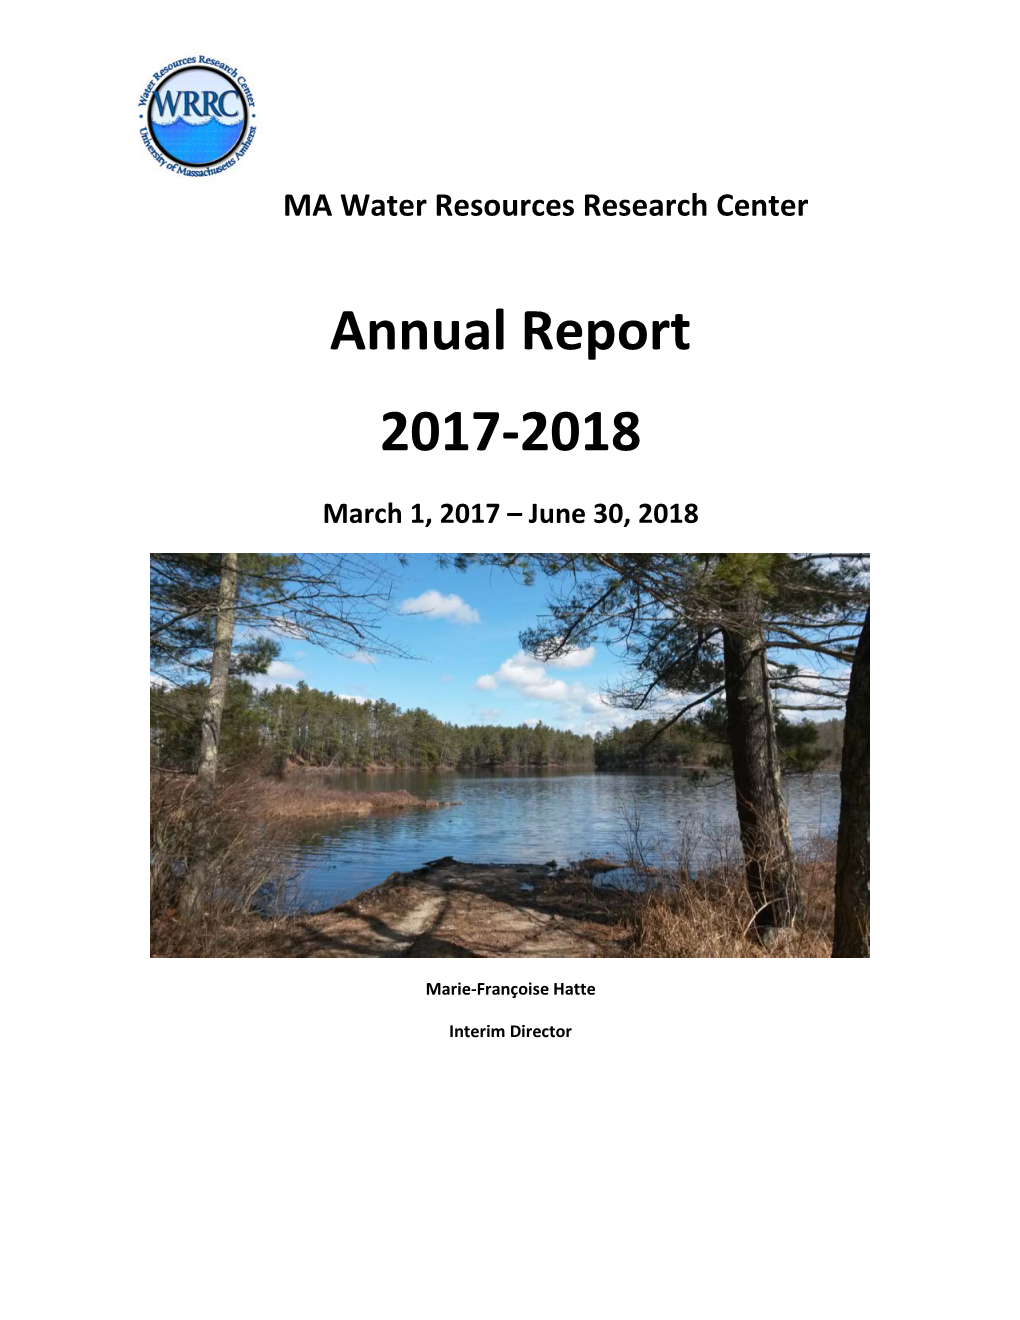 WRRC Annual Report 2017-2018